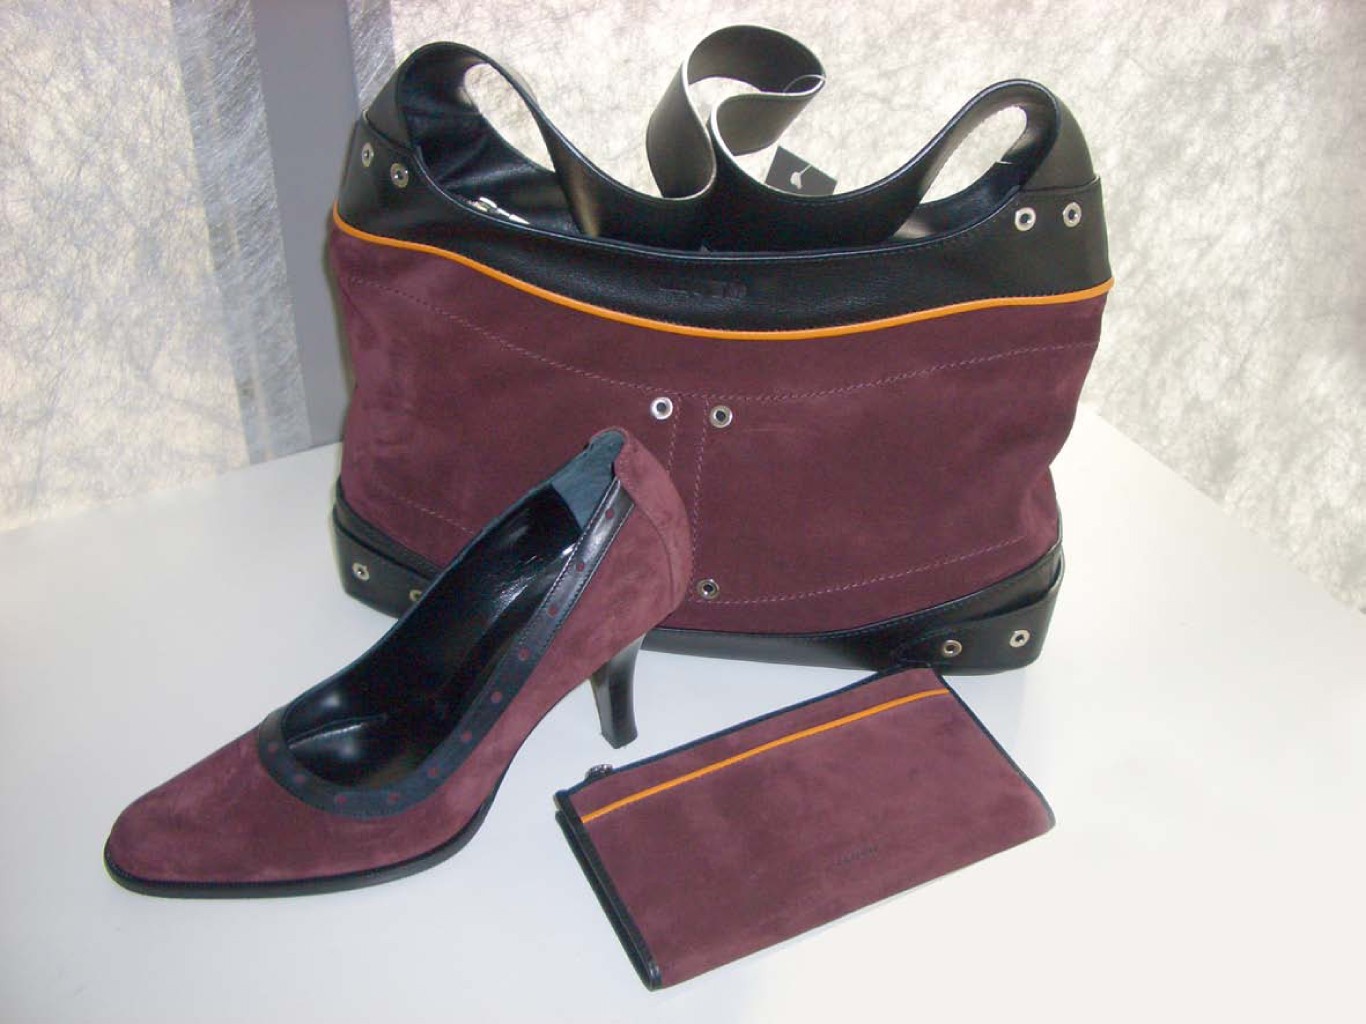 shoes & accessories | LLOYD SHOES | Group business